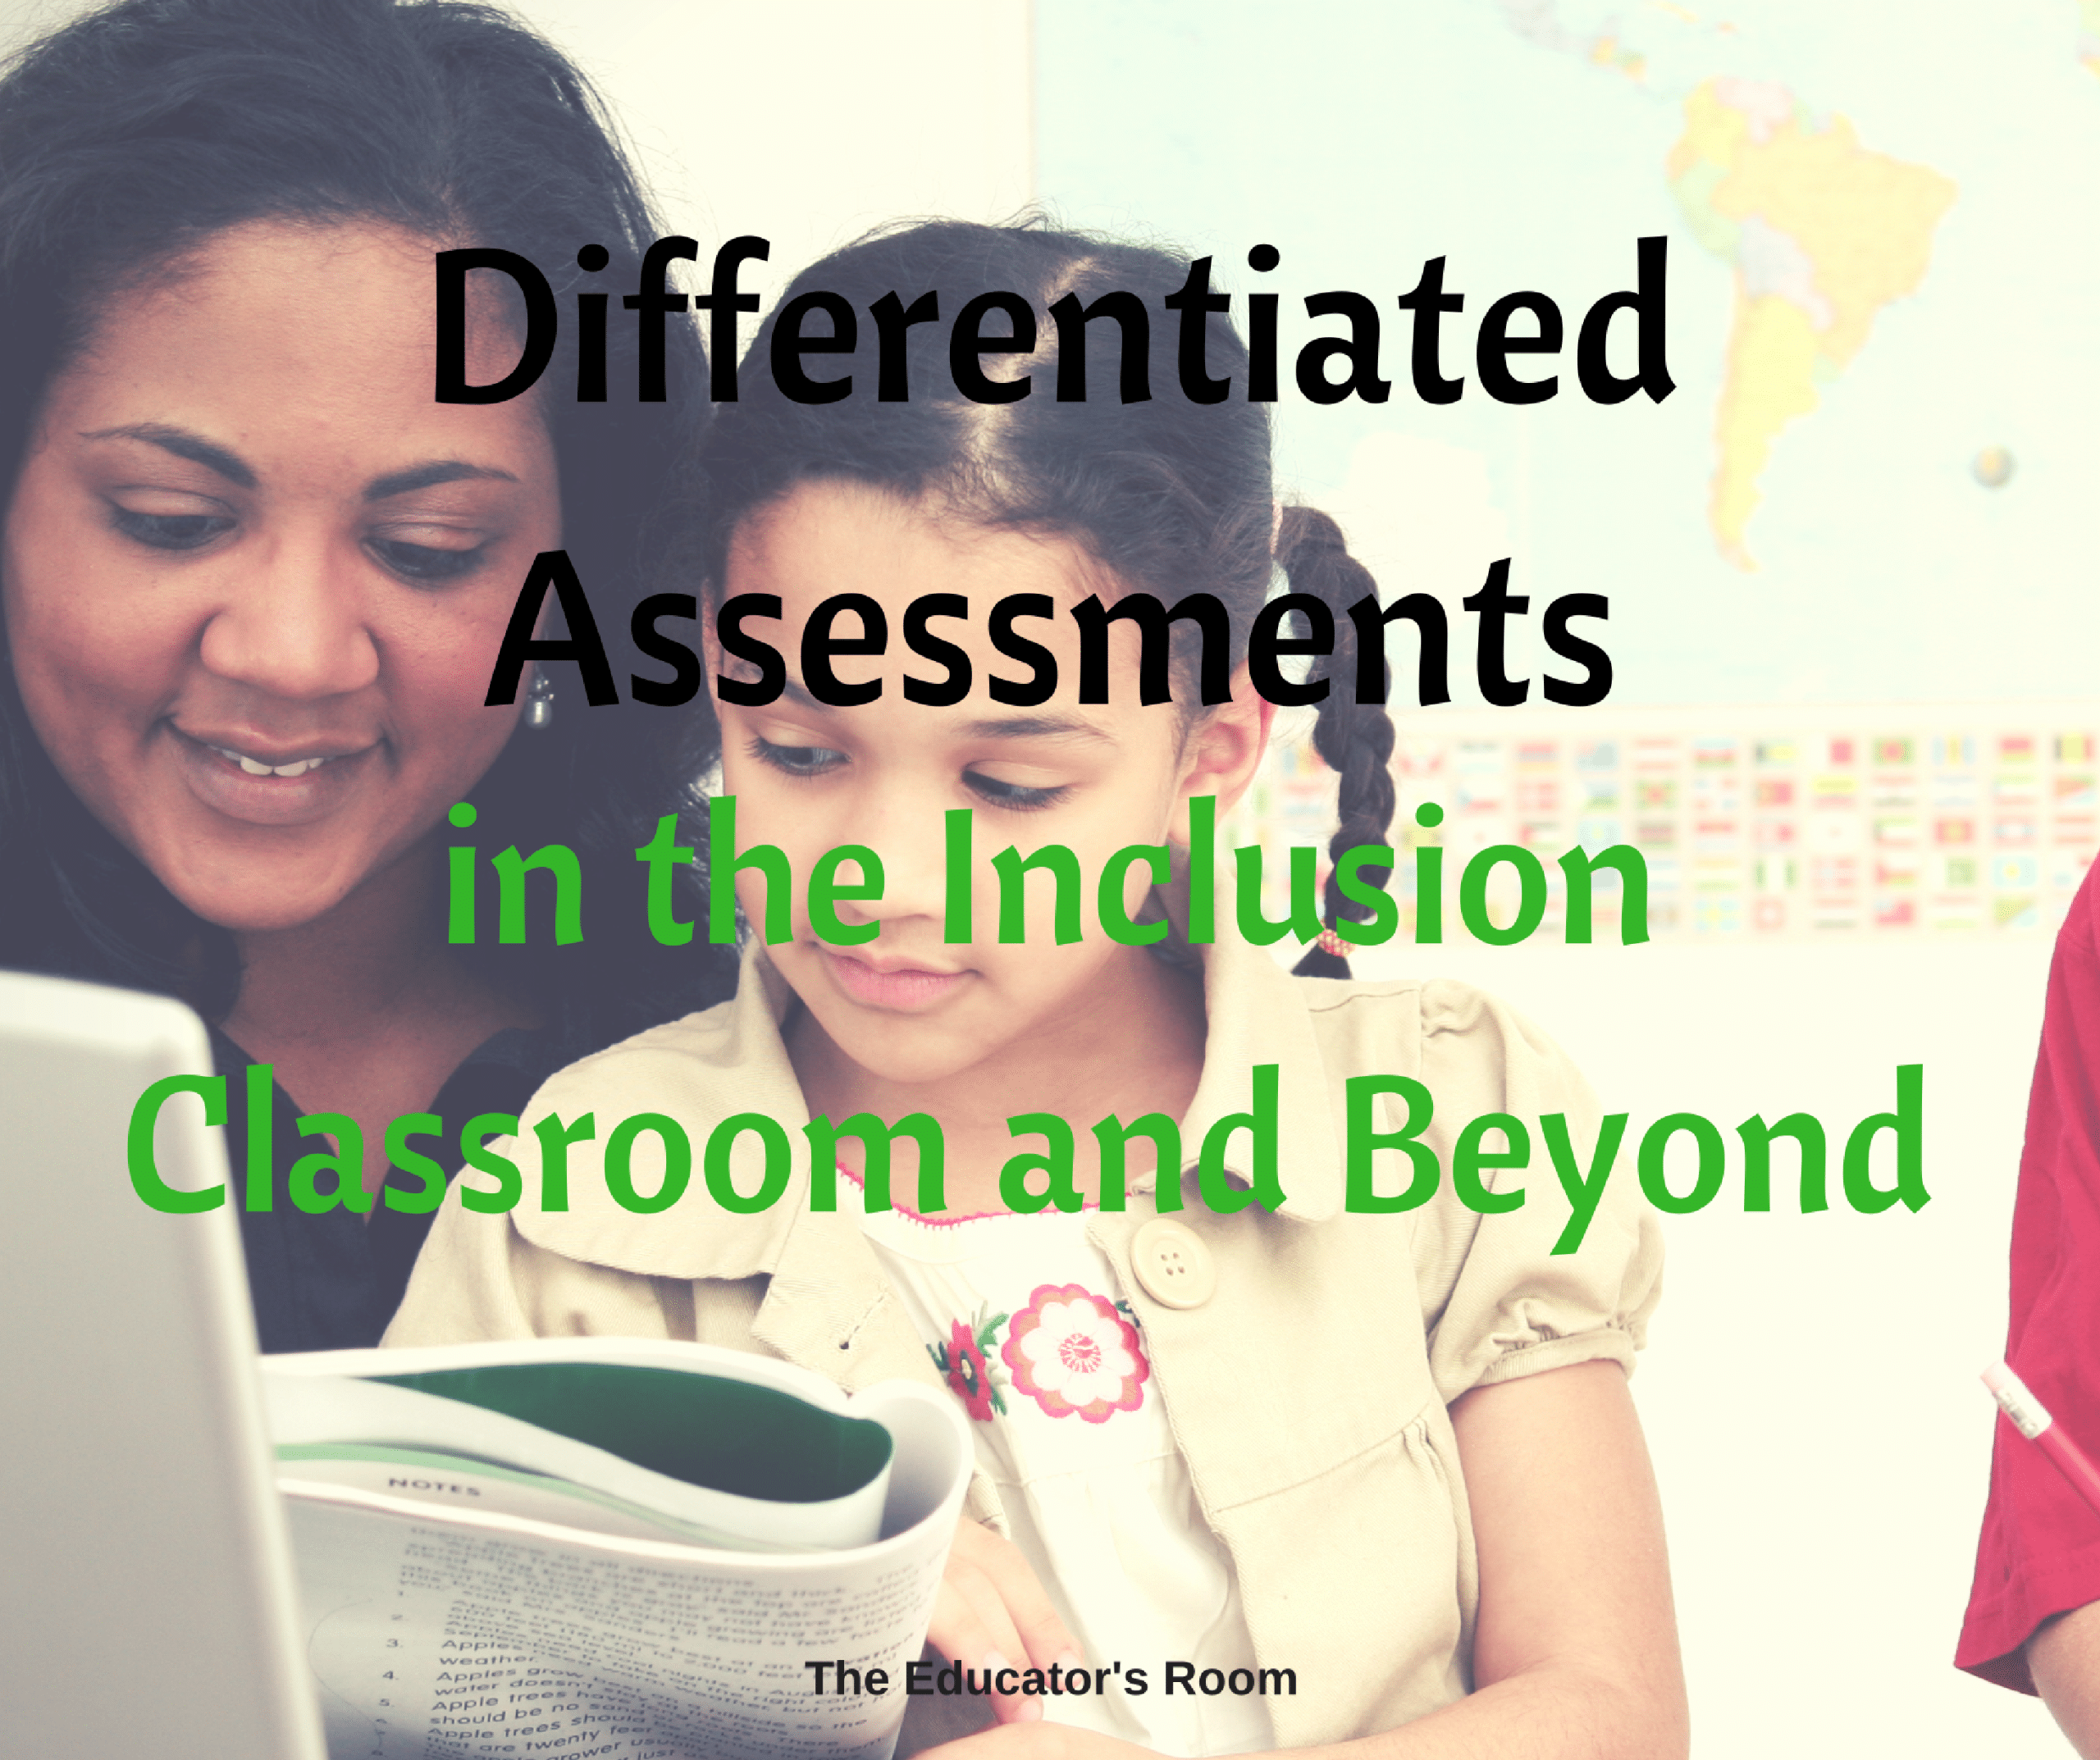 differentiated-assessments-in-the-inclusion-classroom-and-beyond